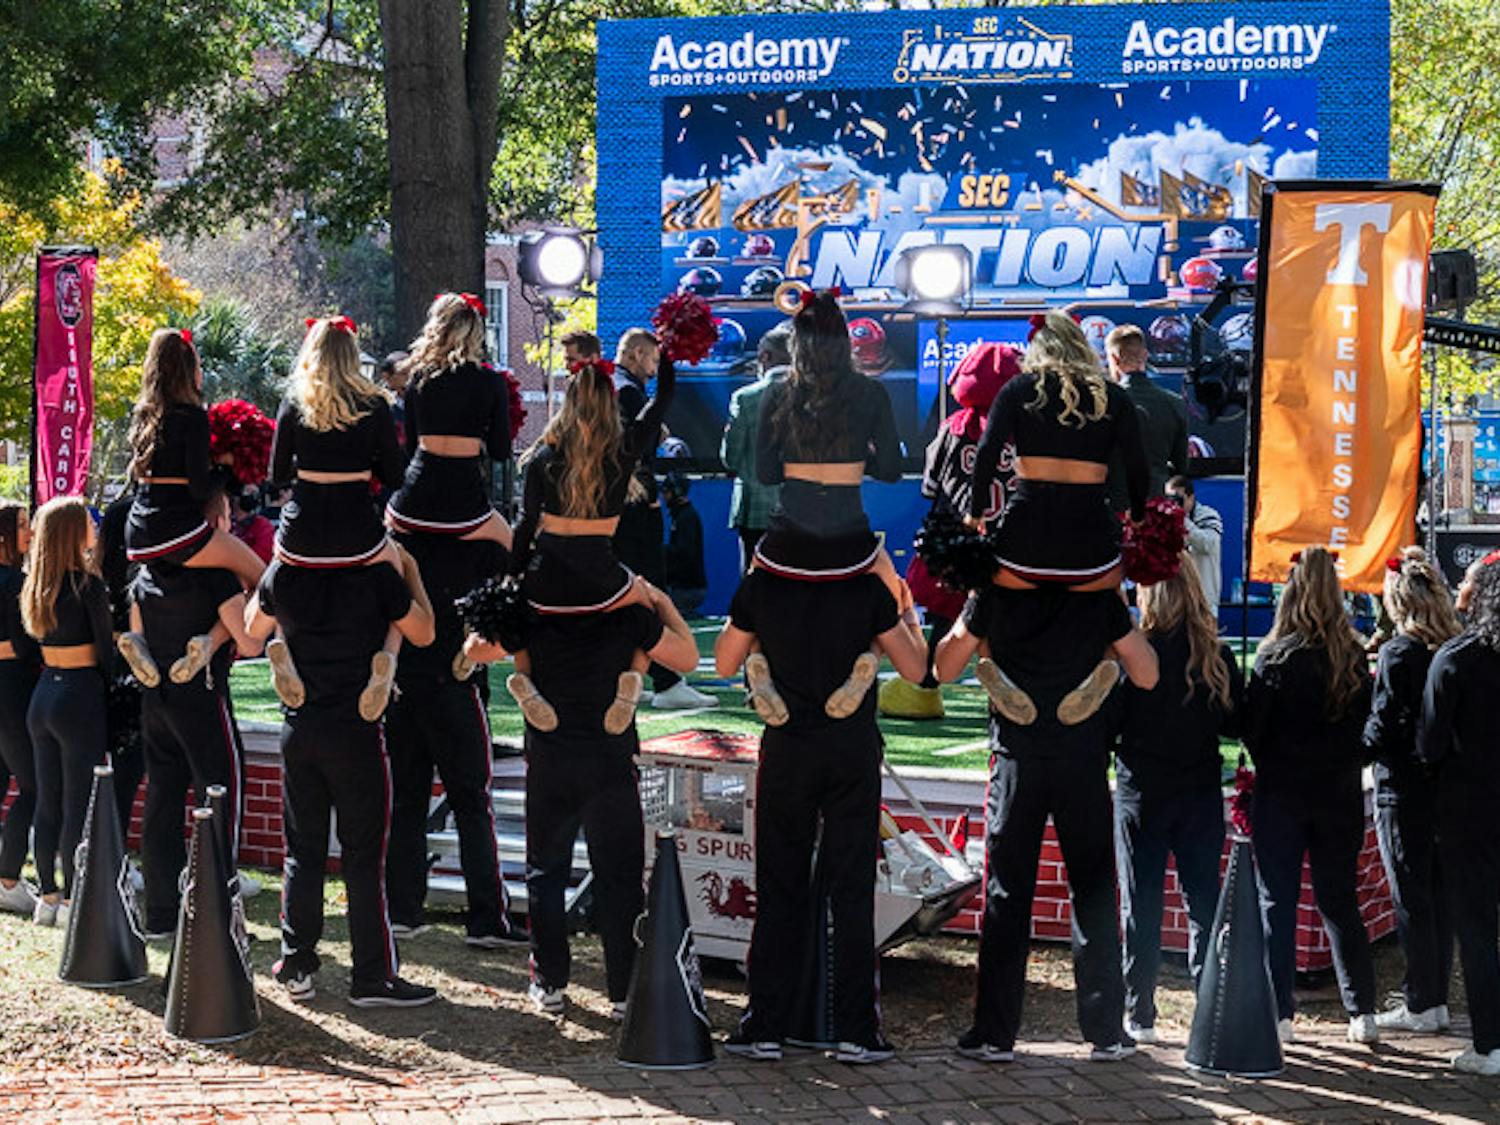 The USC cheer team poses in front of the SEC Nation stage on Nov. 19, 2022. The show covers teams from across the SEC and interviews key coaches and players.